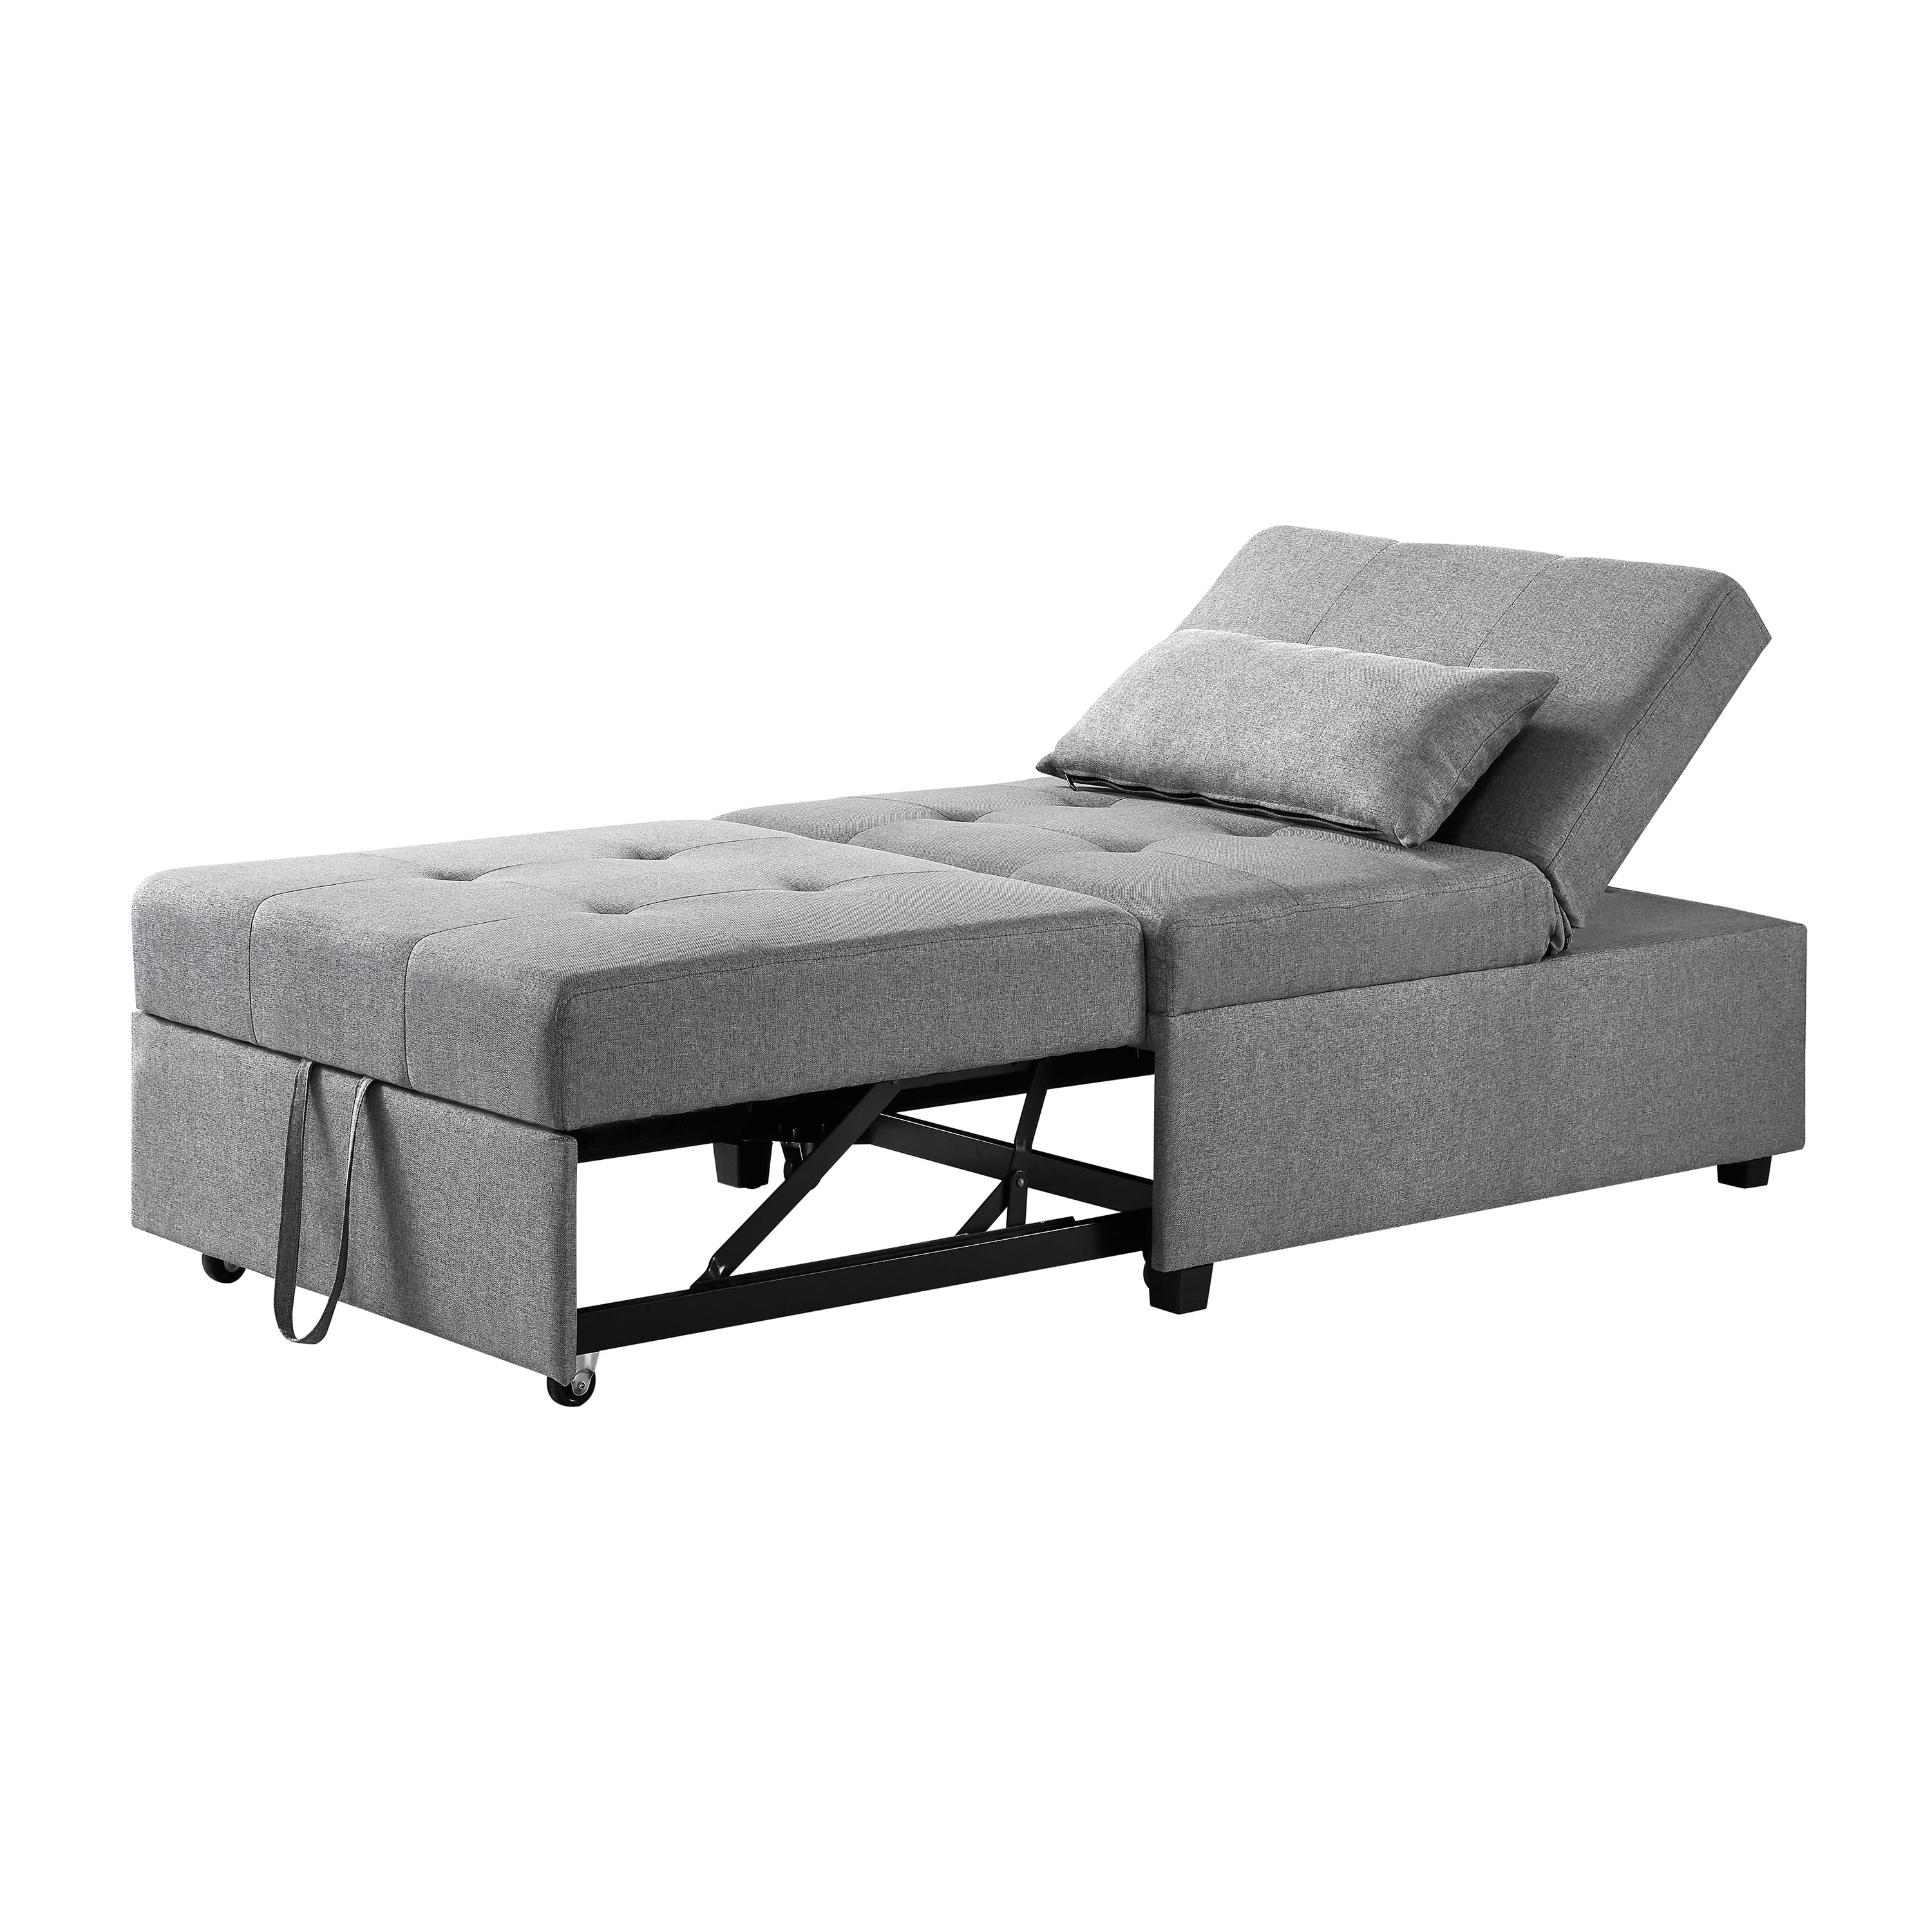 powell boone sofa bed multiple colors